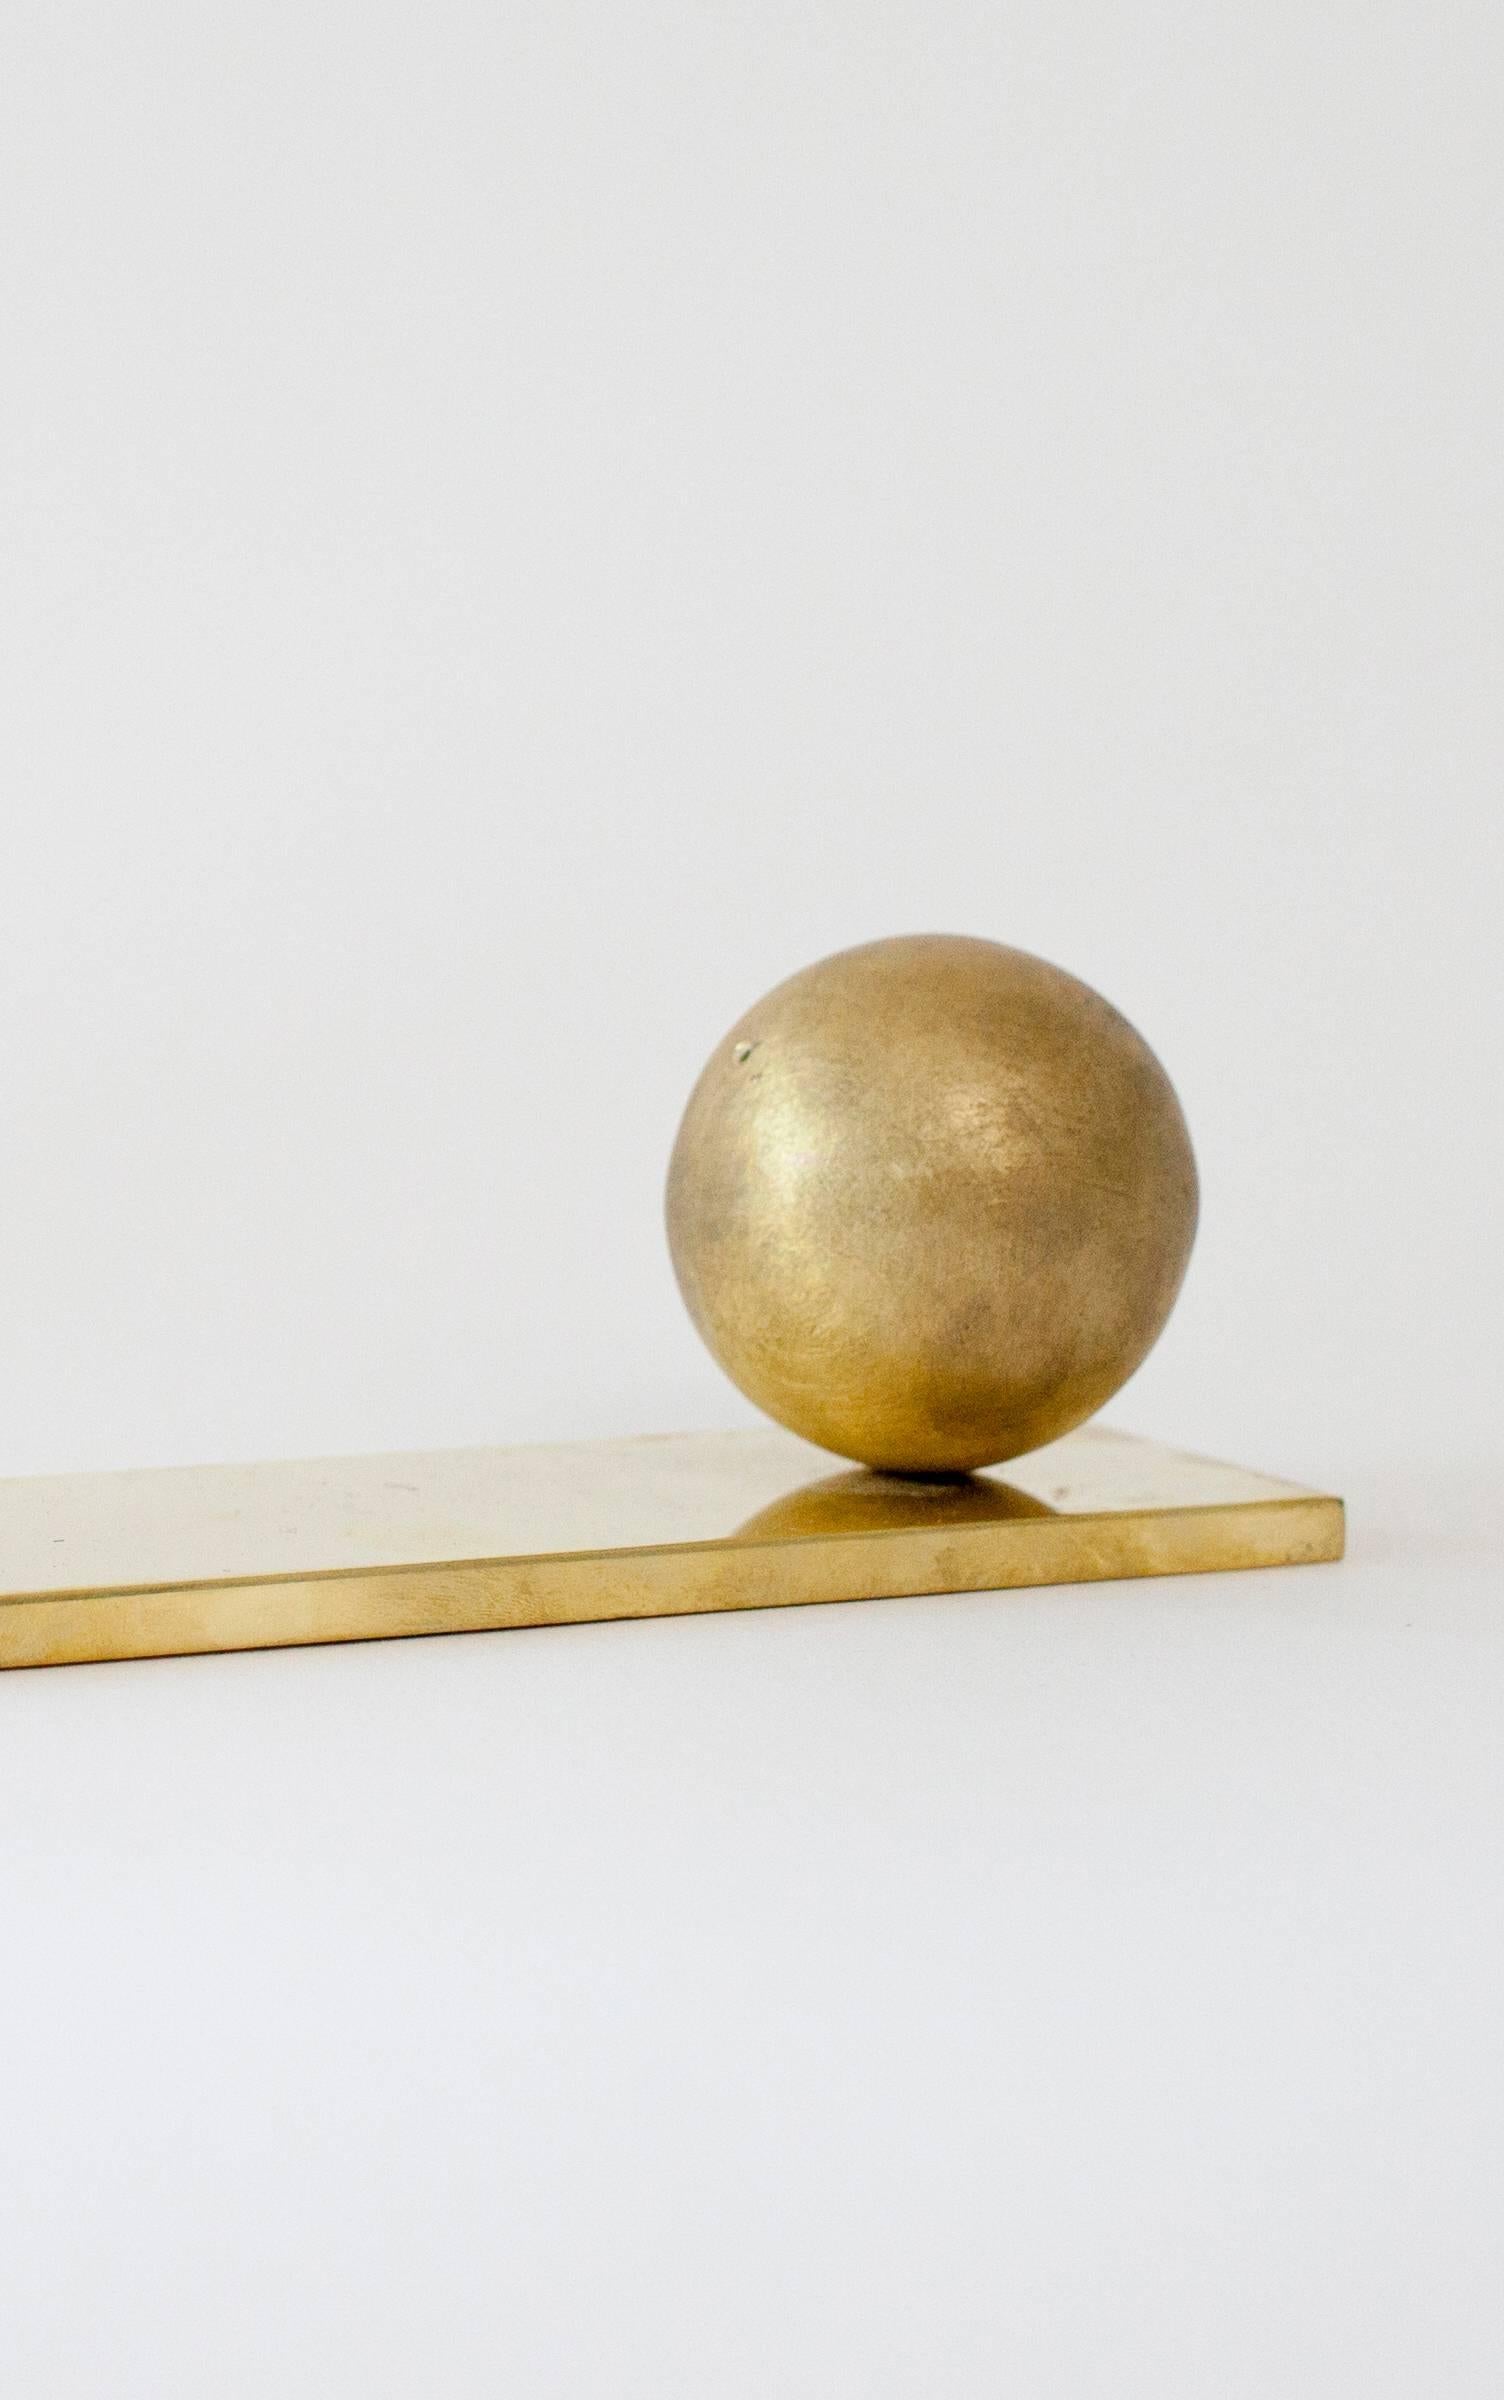 American Contemporary 003 Rest - Incense / Sage in Brass by Orphan Work, 2018